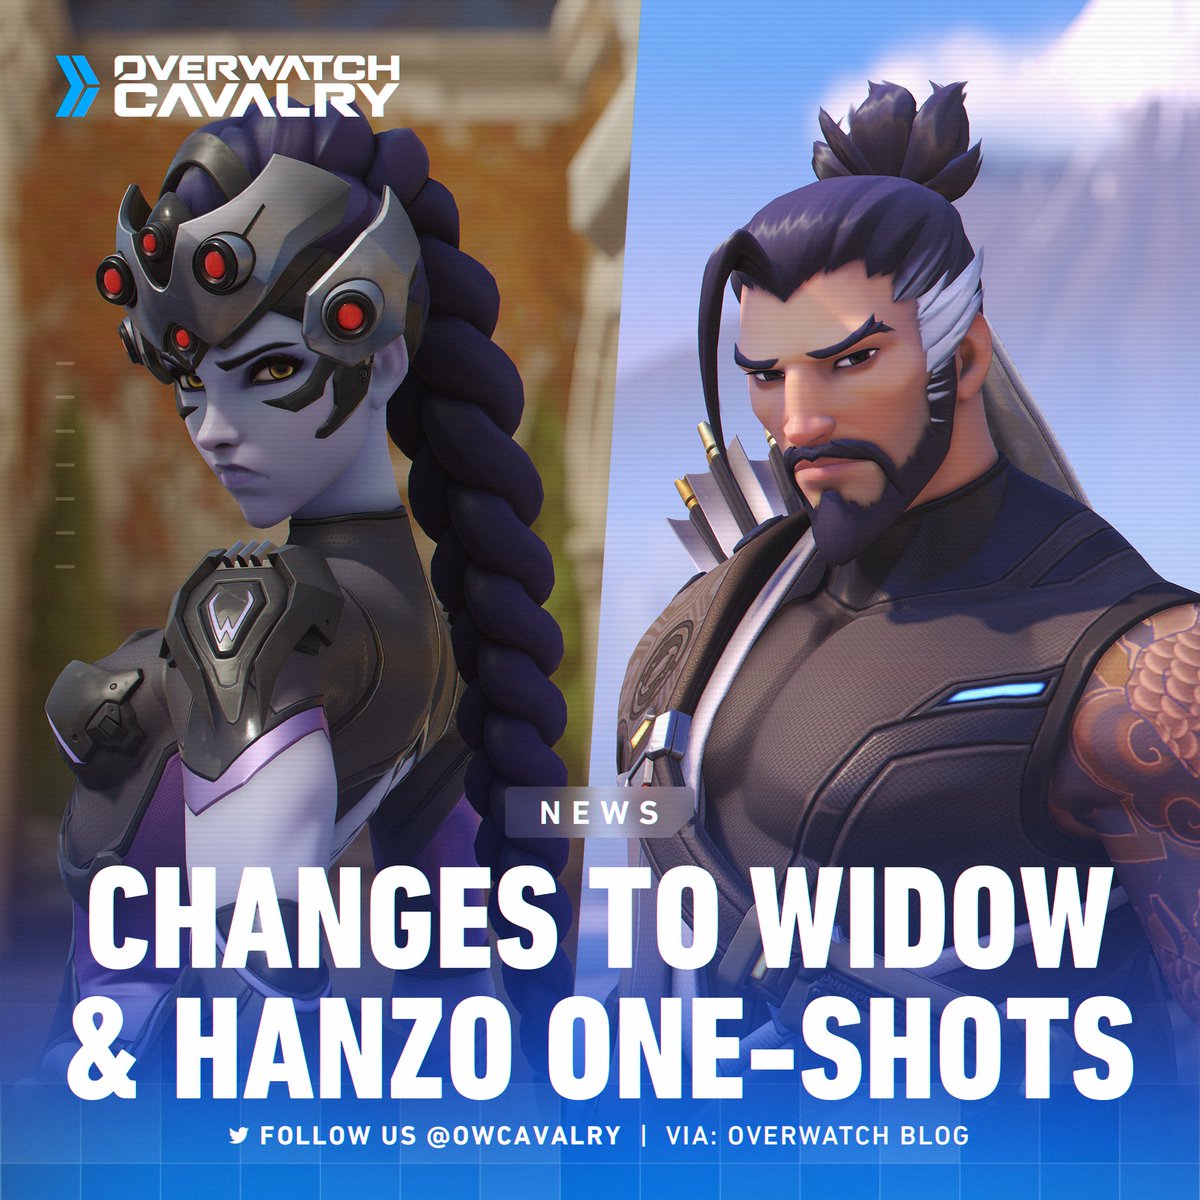 Nerfs to some one-shots are coming to #Overwatch2 💀

🕷️ Widowmaker's damage falloff will be changed so that she can't one-shot 200 health heroes from beyond 50 meters
🏹 Hanzo will receive a damage nerf so he can no longer one-shot 250 health heroes

📰 overwatch.blizzard.com/en-us/news/239…